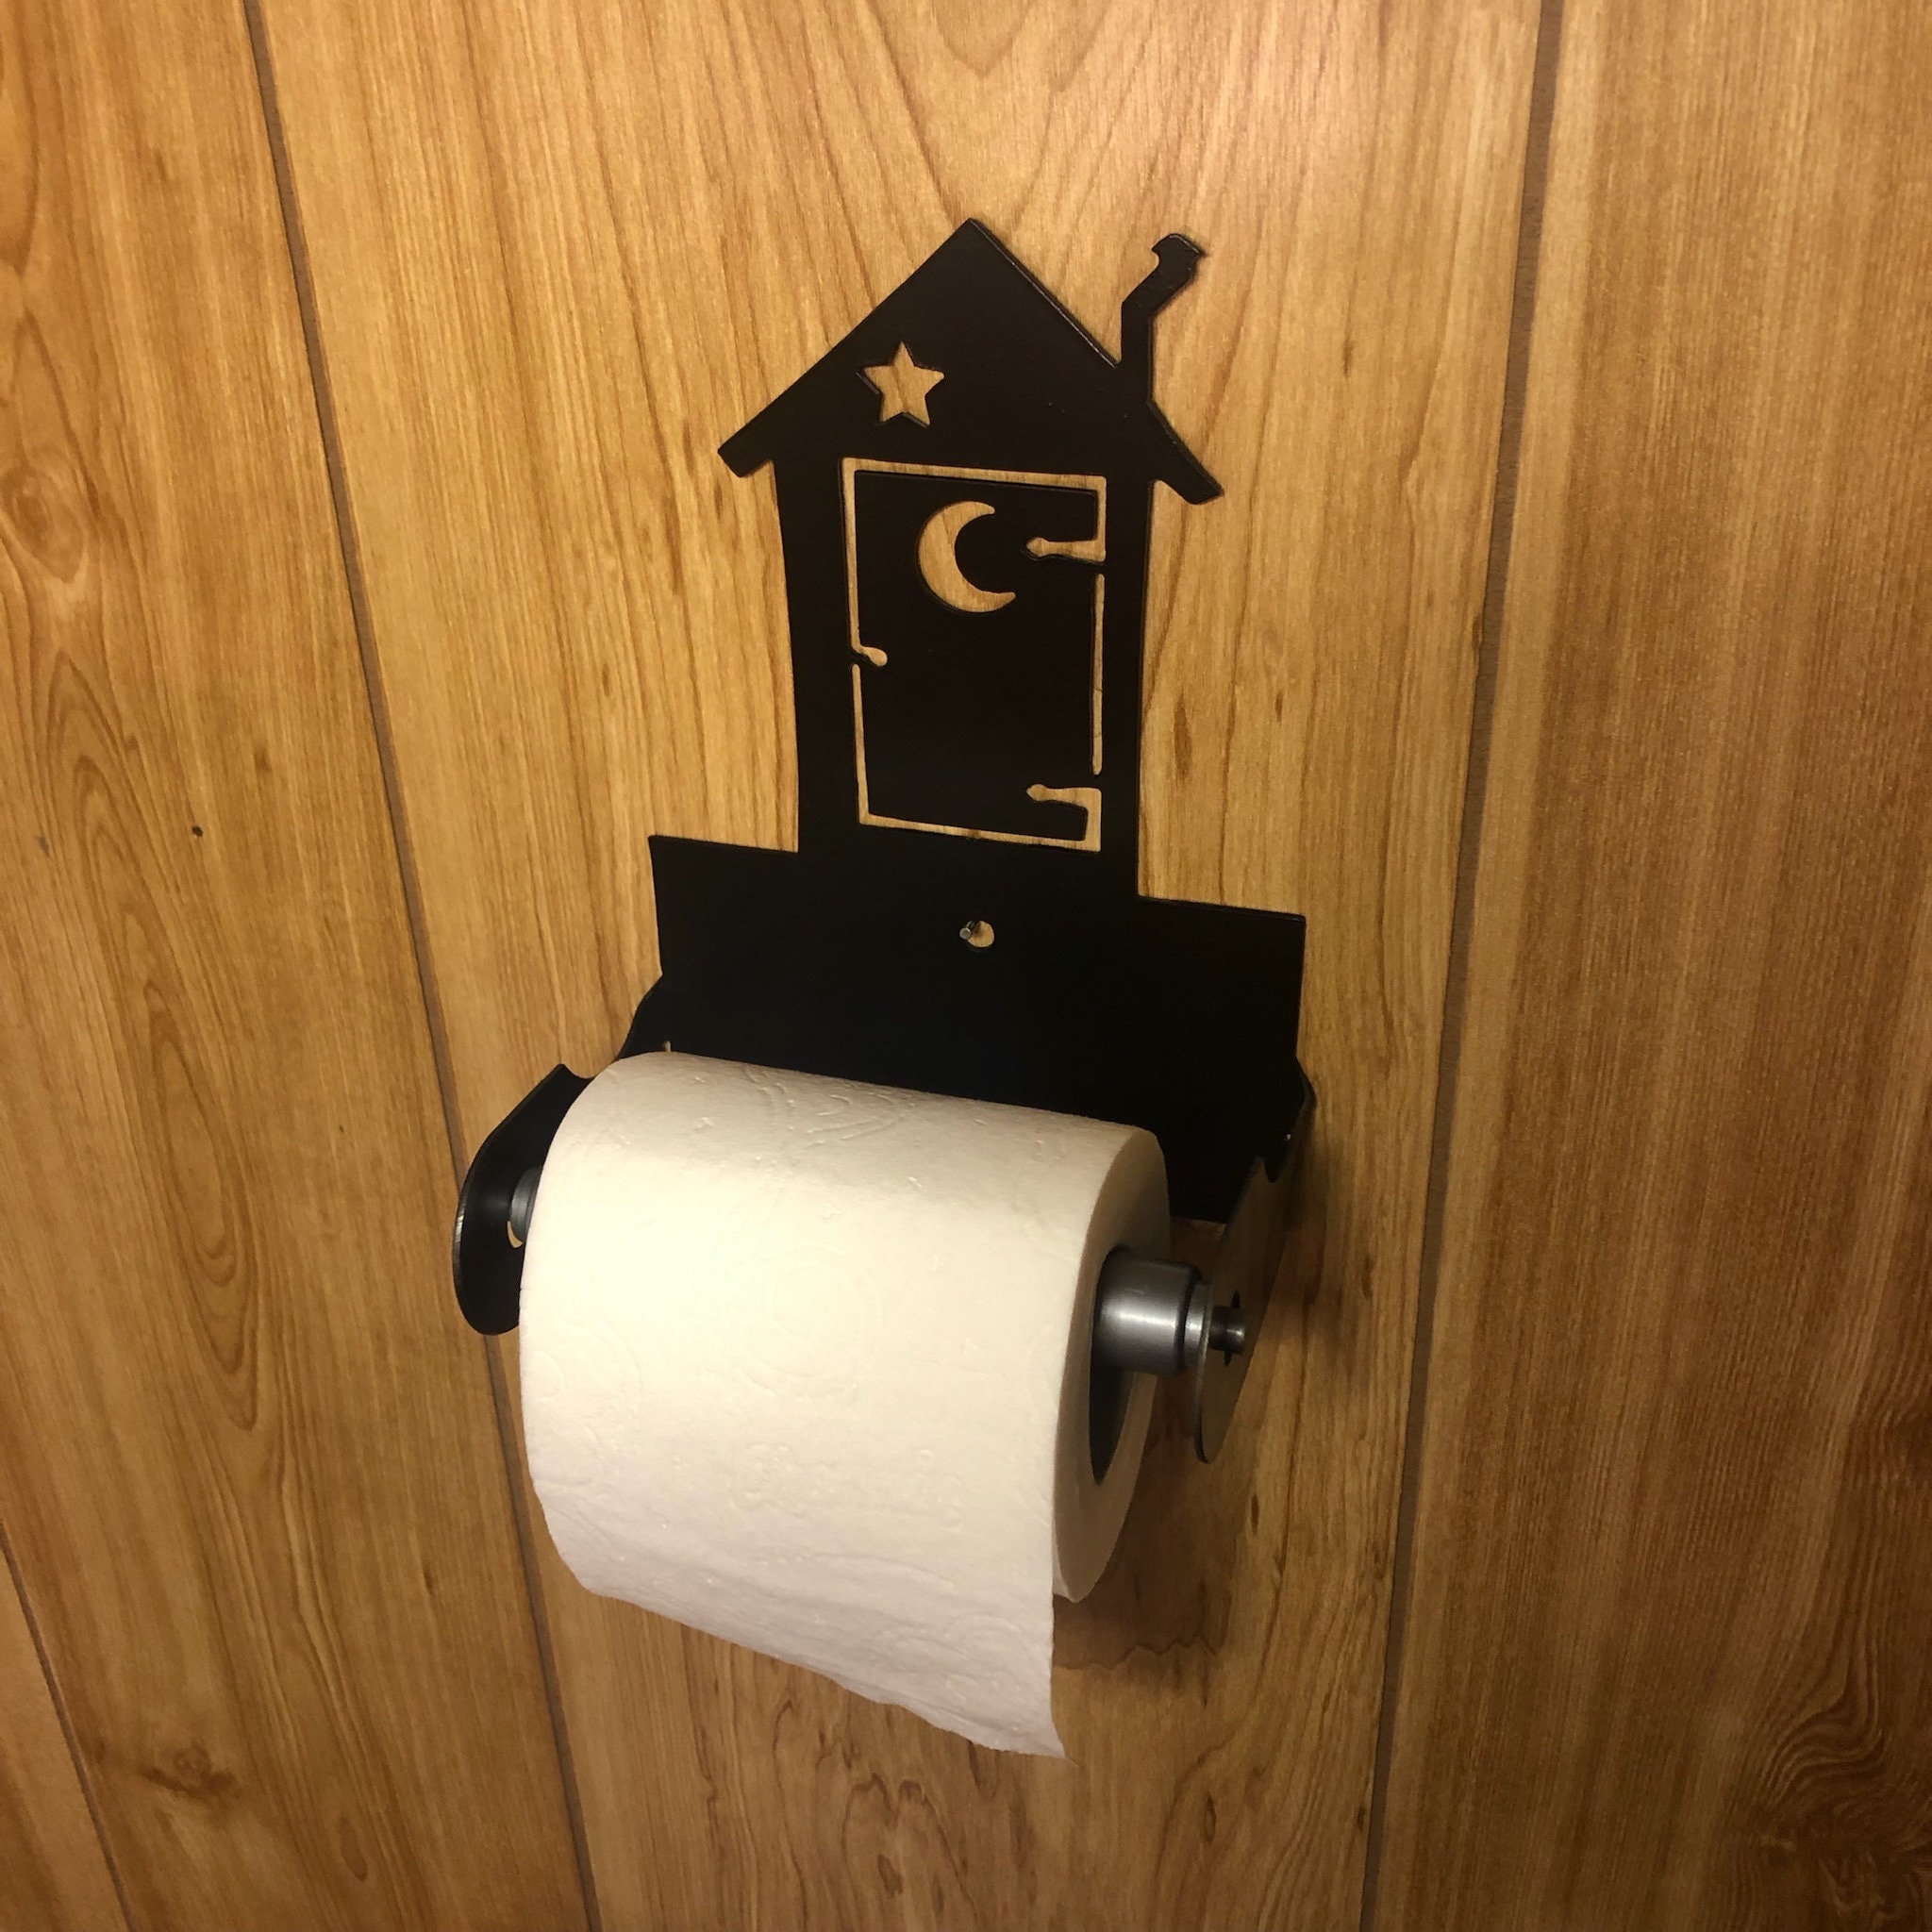 The Wonderful and Amazing Toilet Paper Fishing Reel Holder